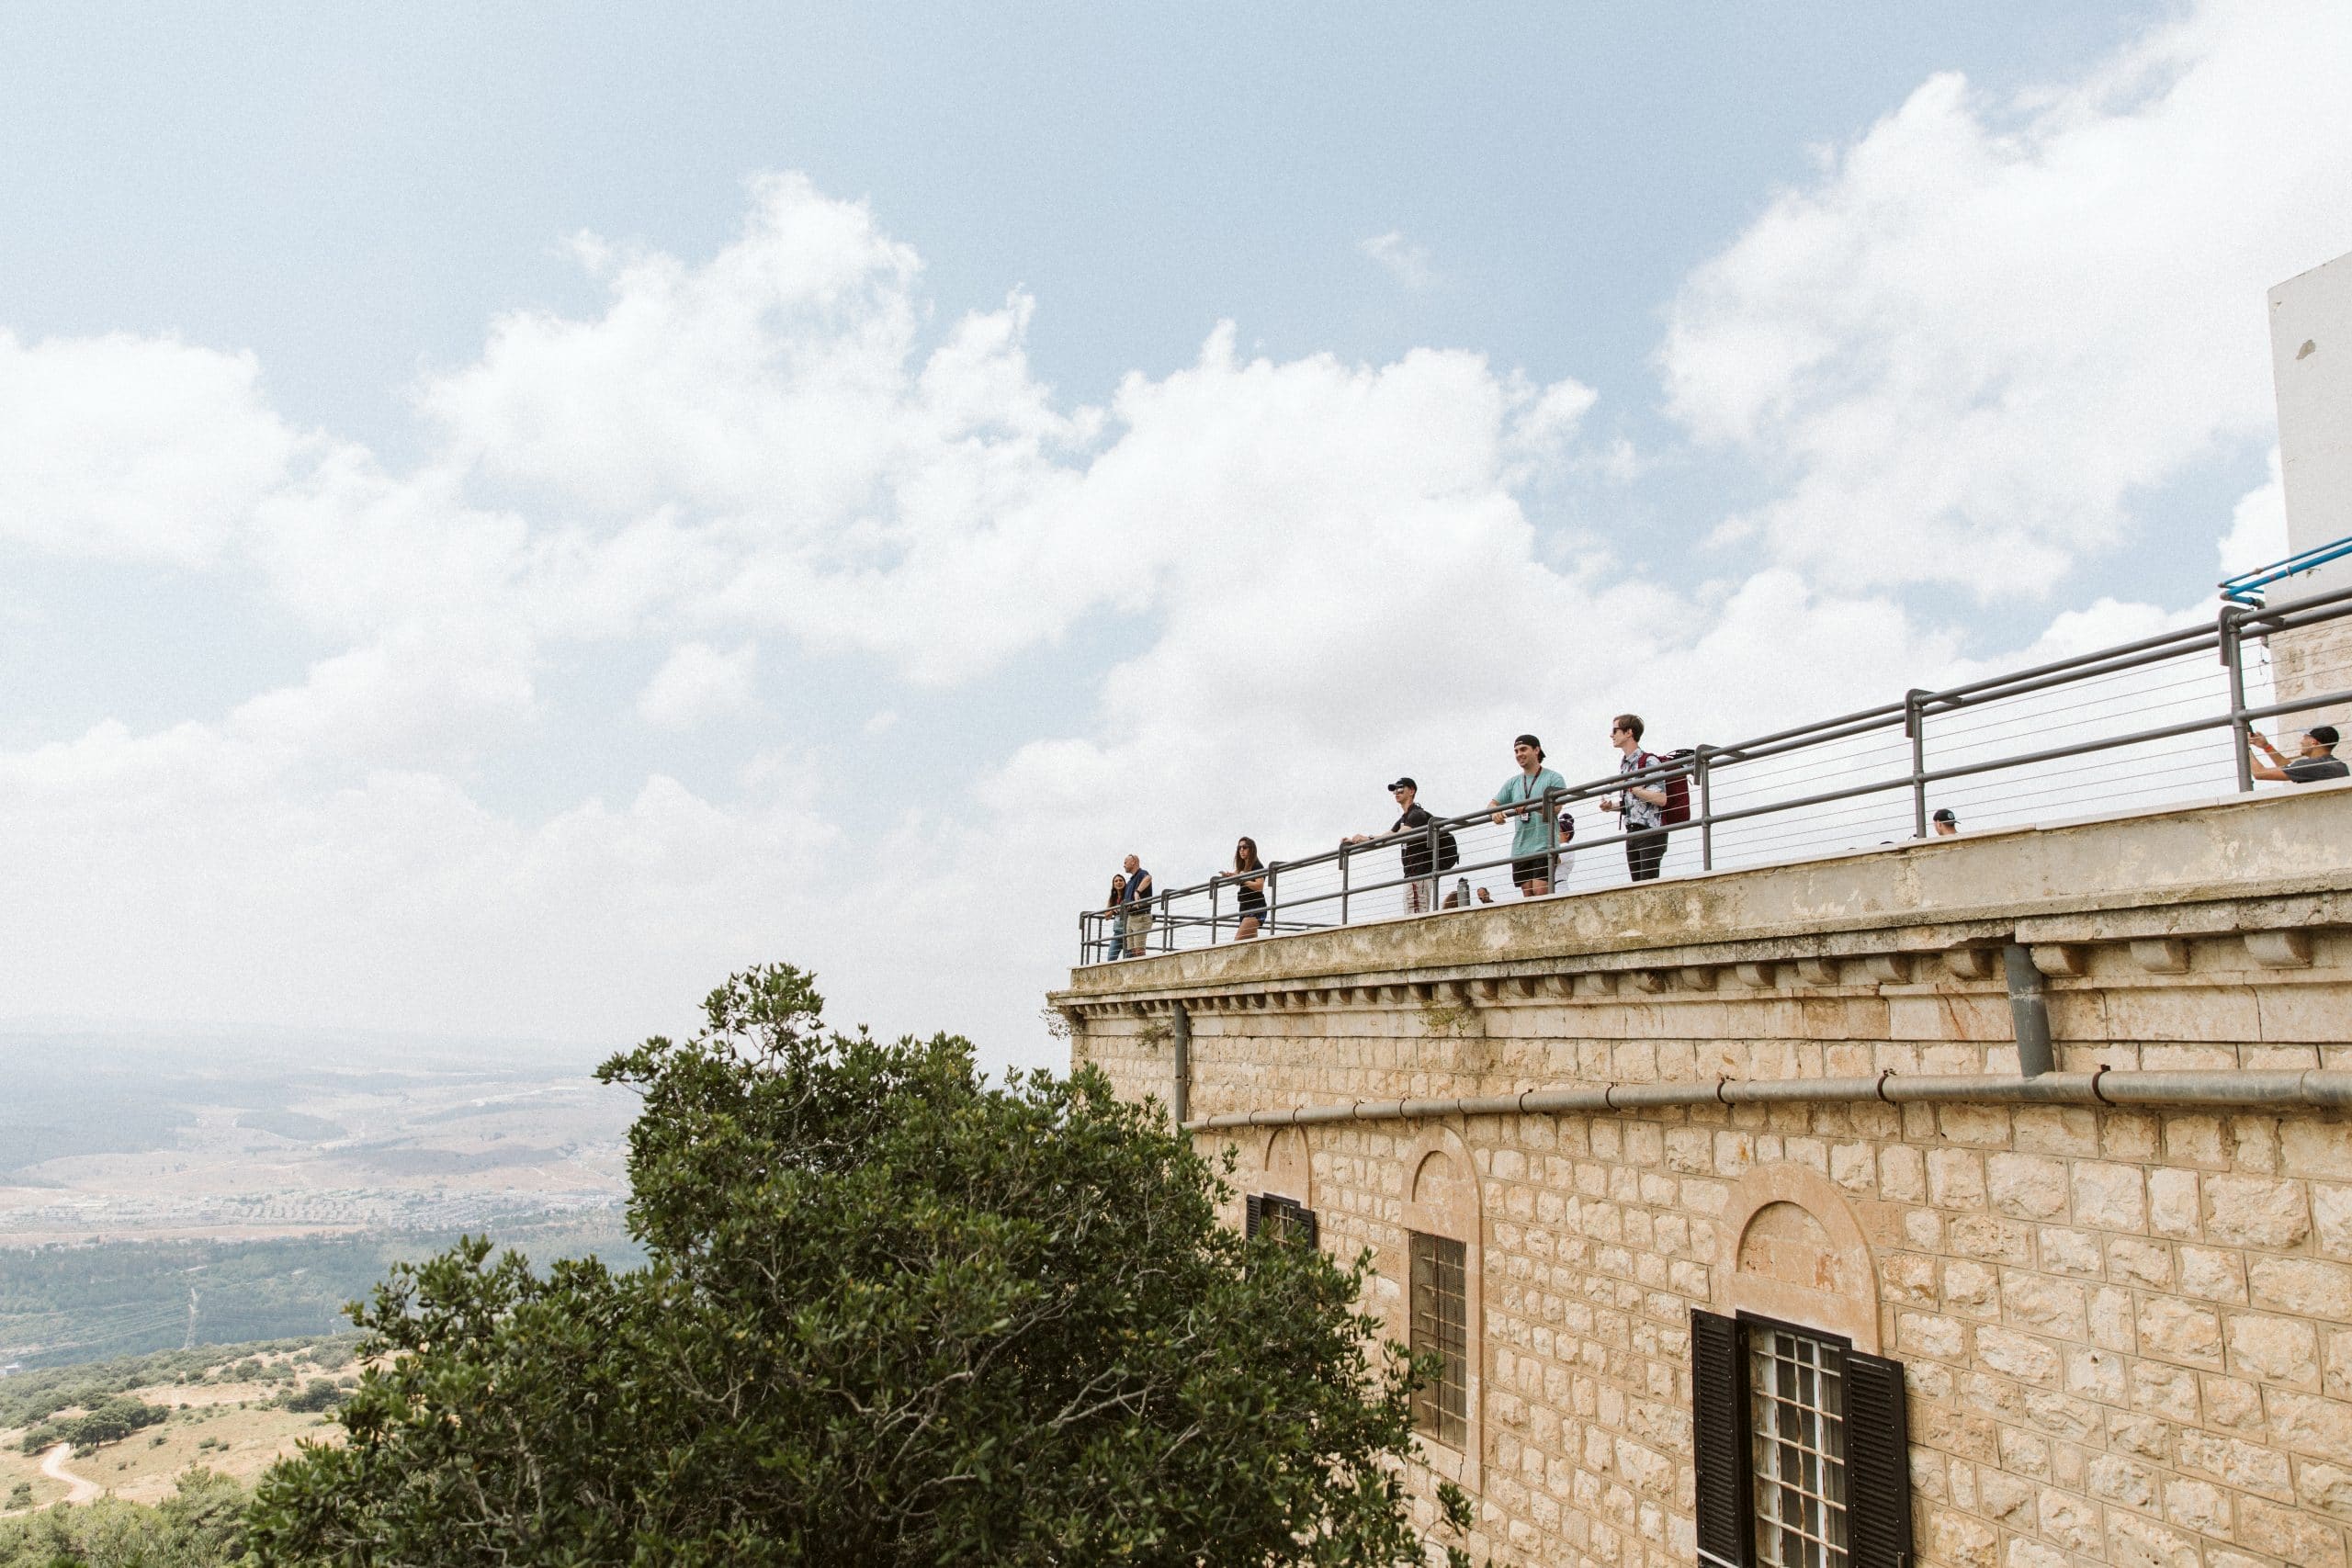 tourists looking out over an overlook